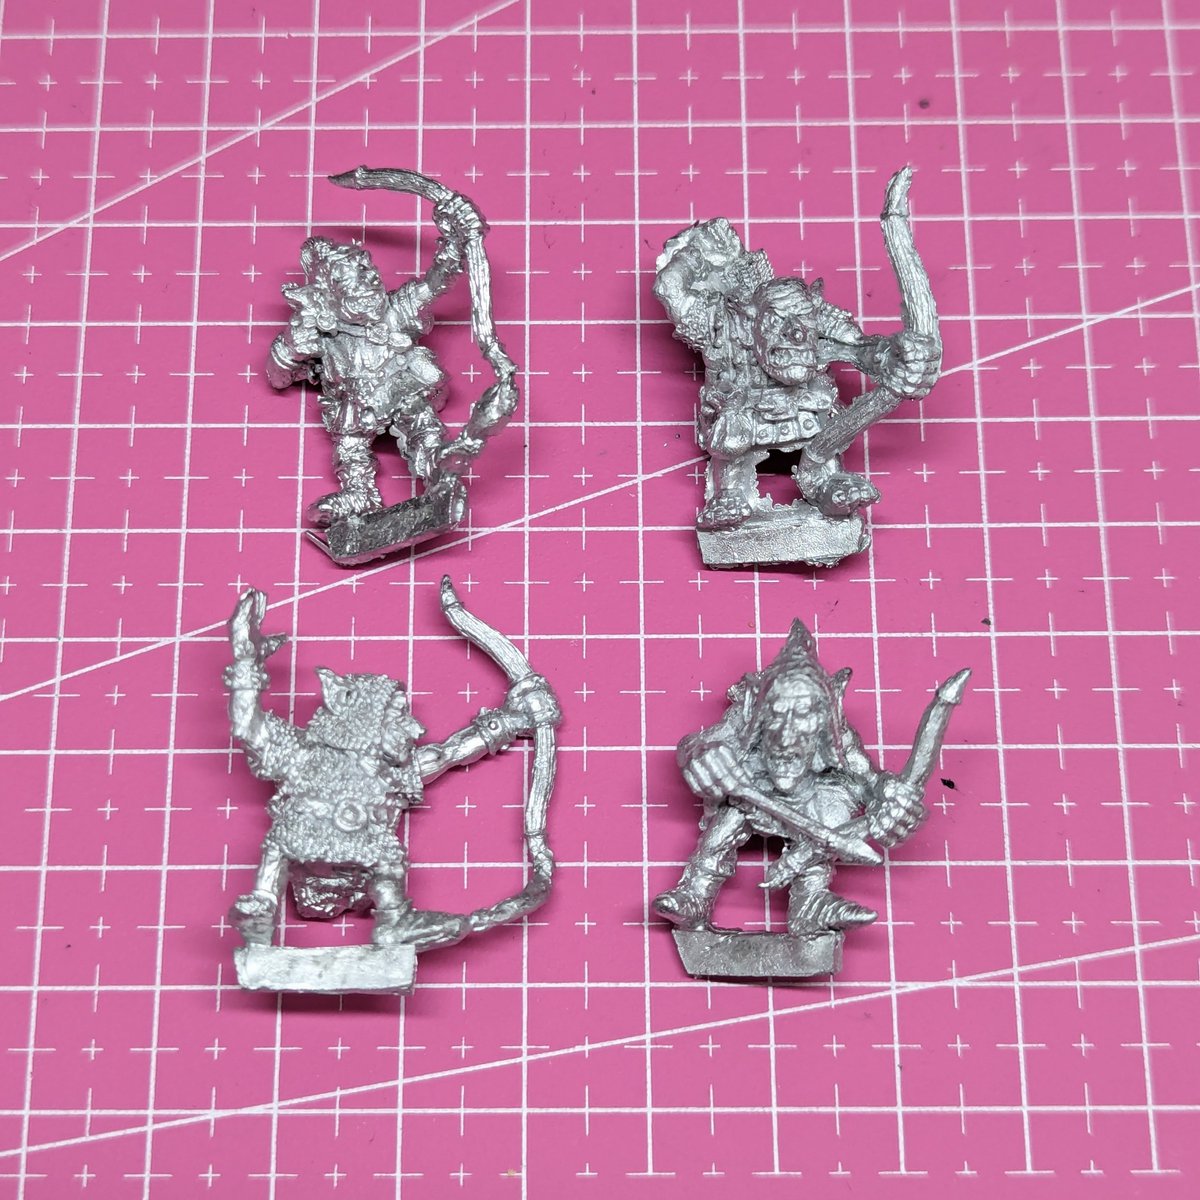 Do you like Kev Adams goblins? Like metal minis? Playing #TheOldWorld? You with like these new miniatures from @Oldschoolminis sculpted by the legend himself! These are the Barndoor Stickers and you can grab them now! #Ad